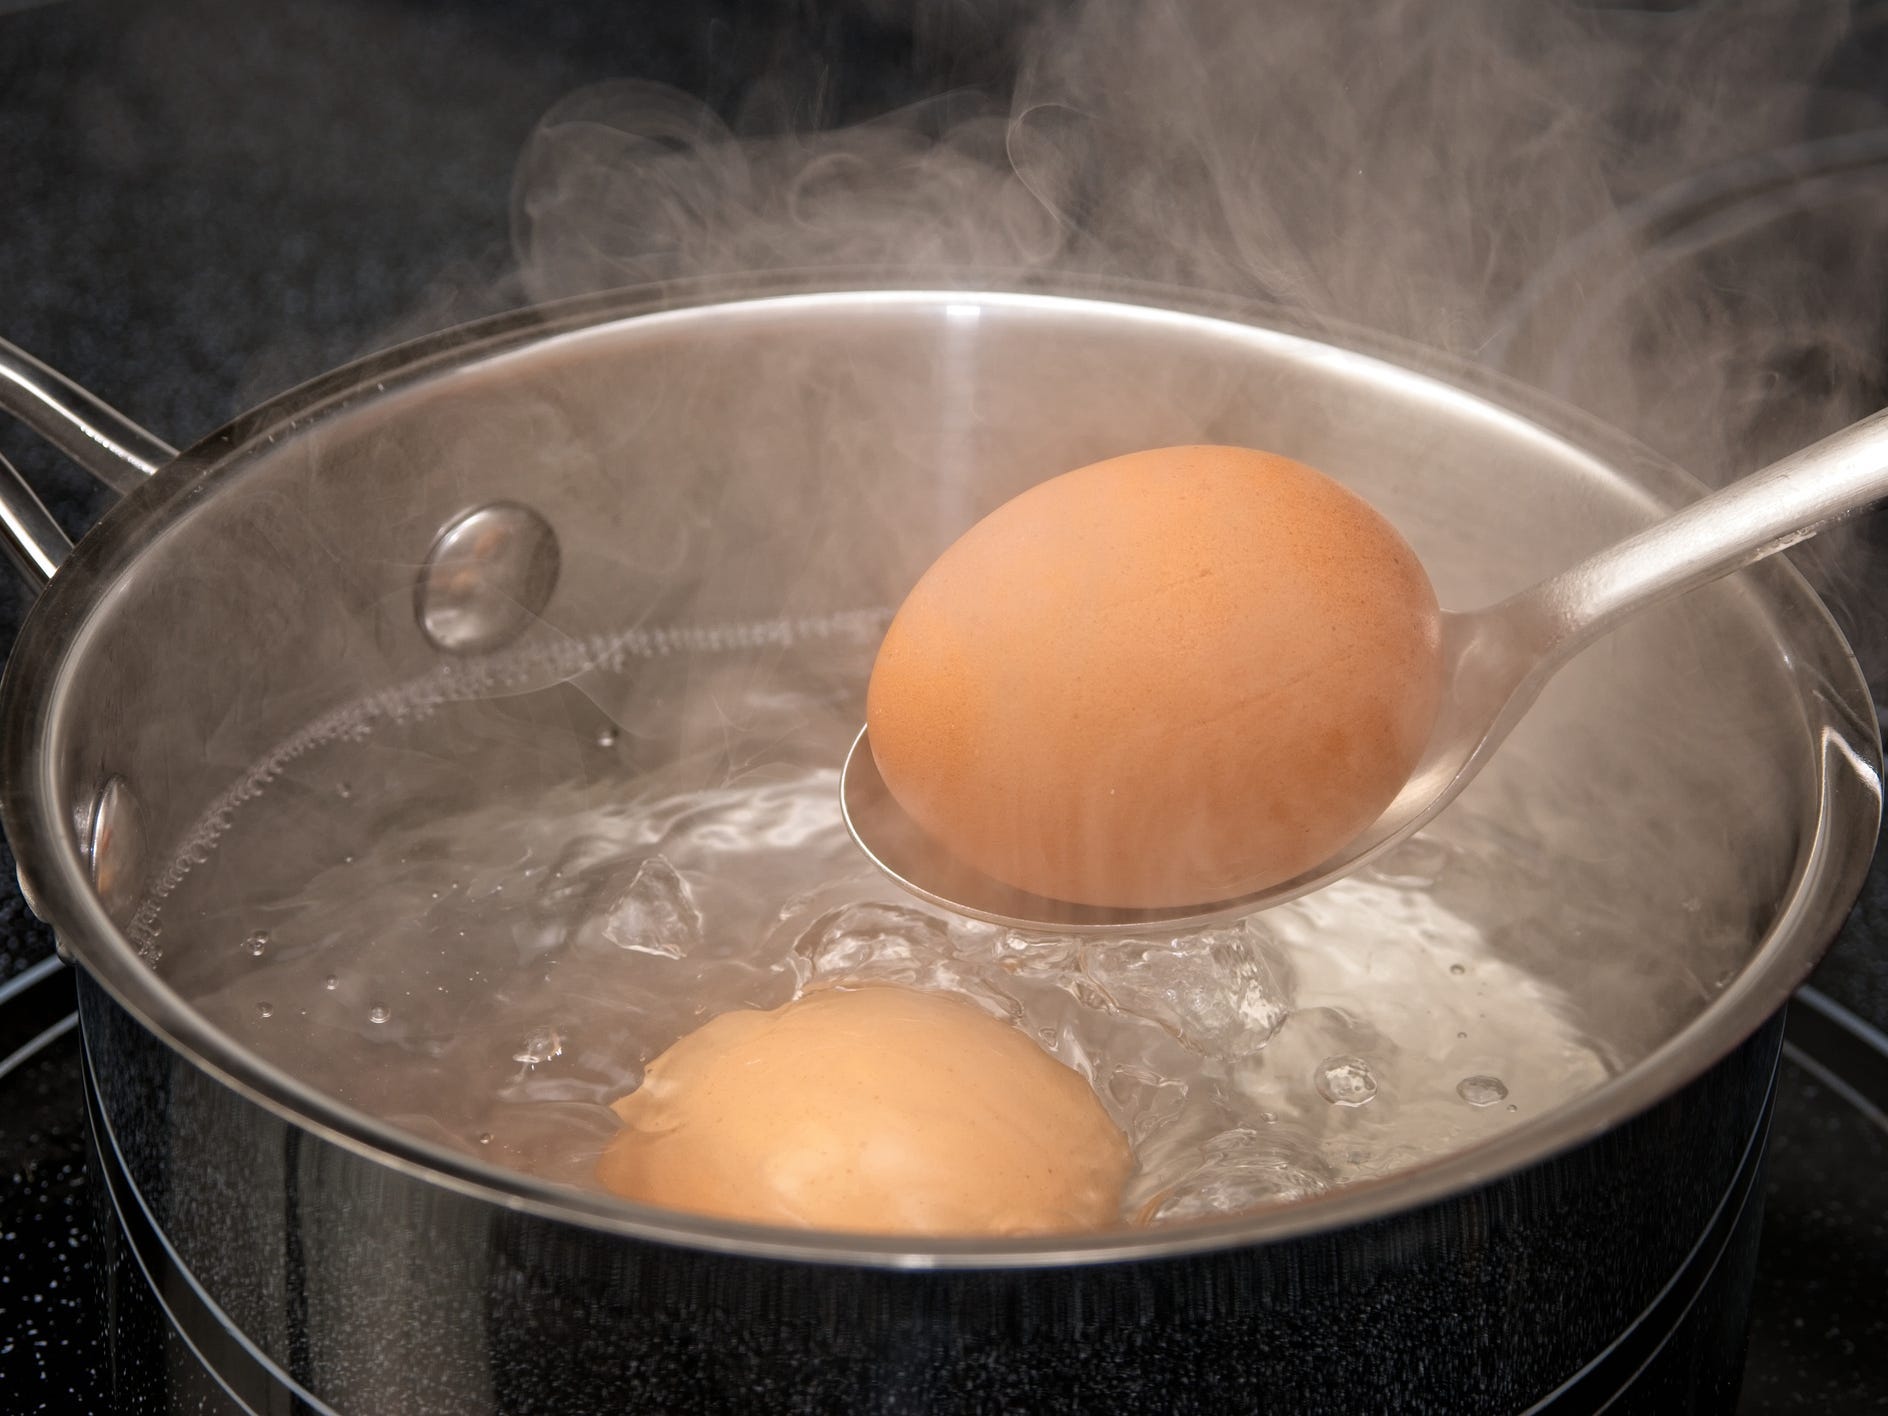 Lowering an egg into a pot of boiling water with a spoon